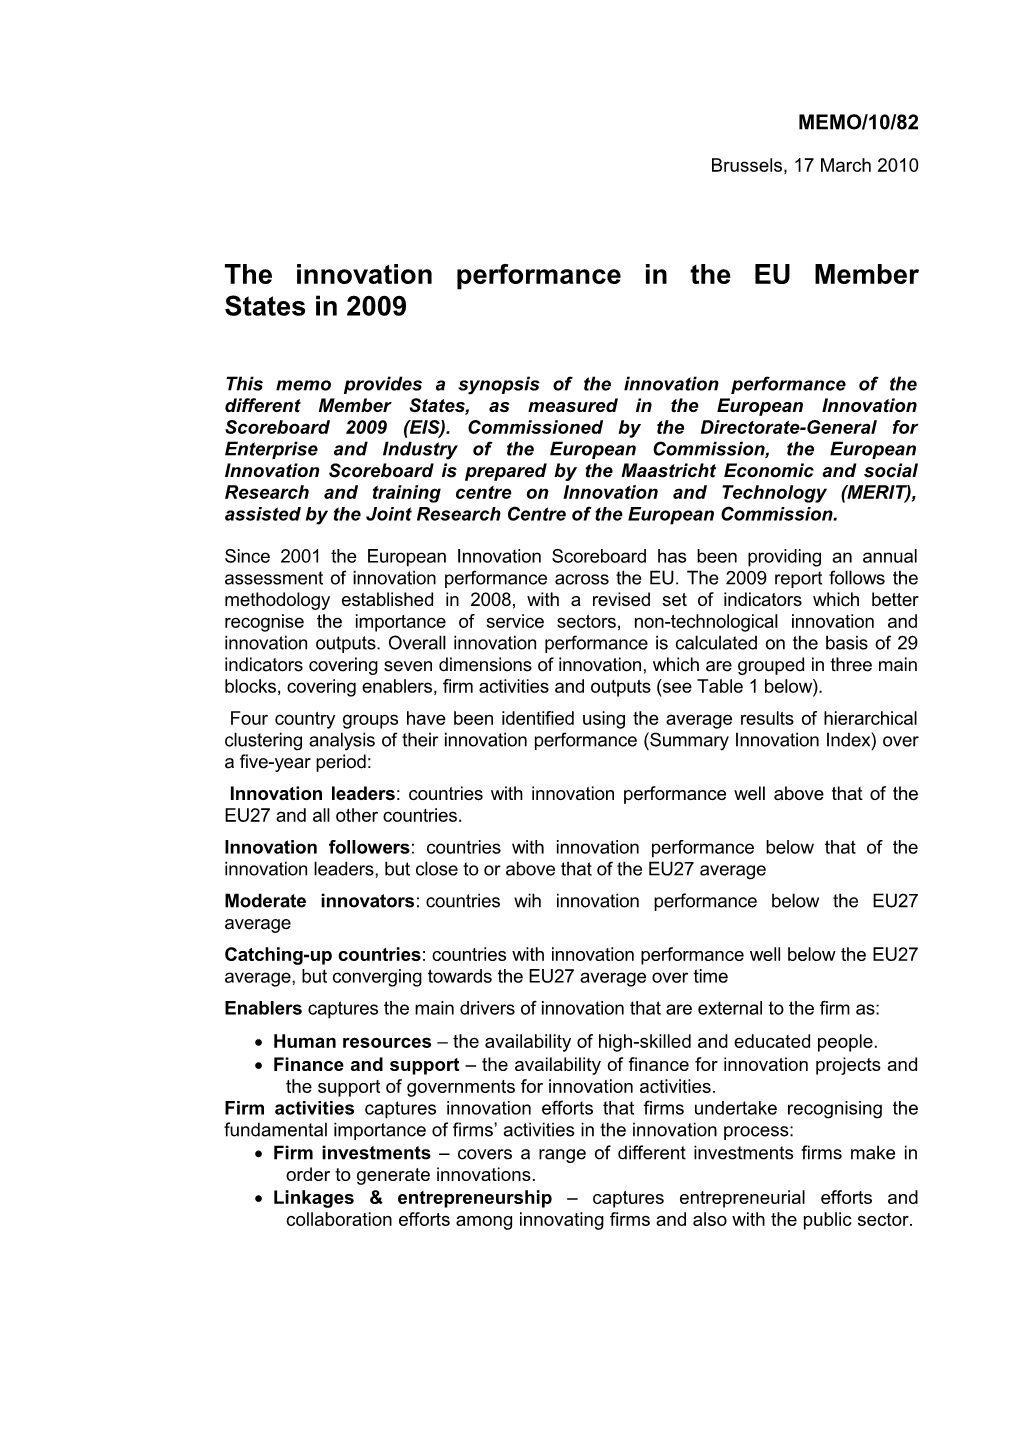 The Innovation Performance in the EU Member States in 2009